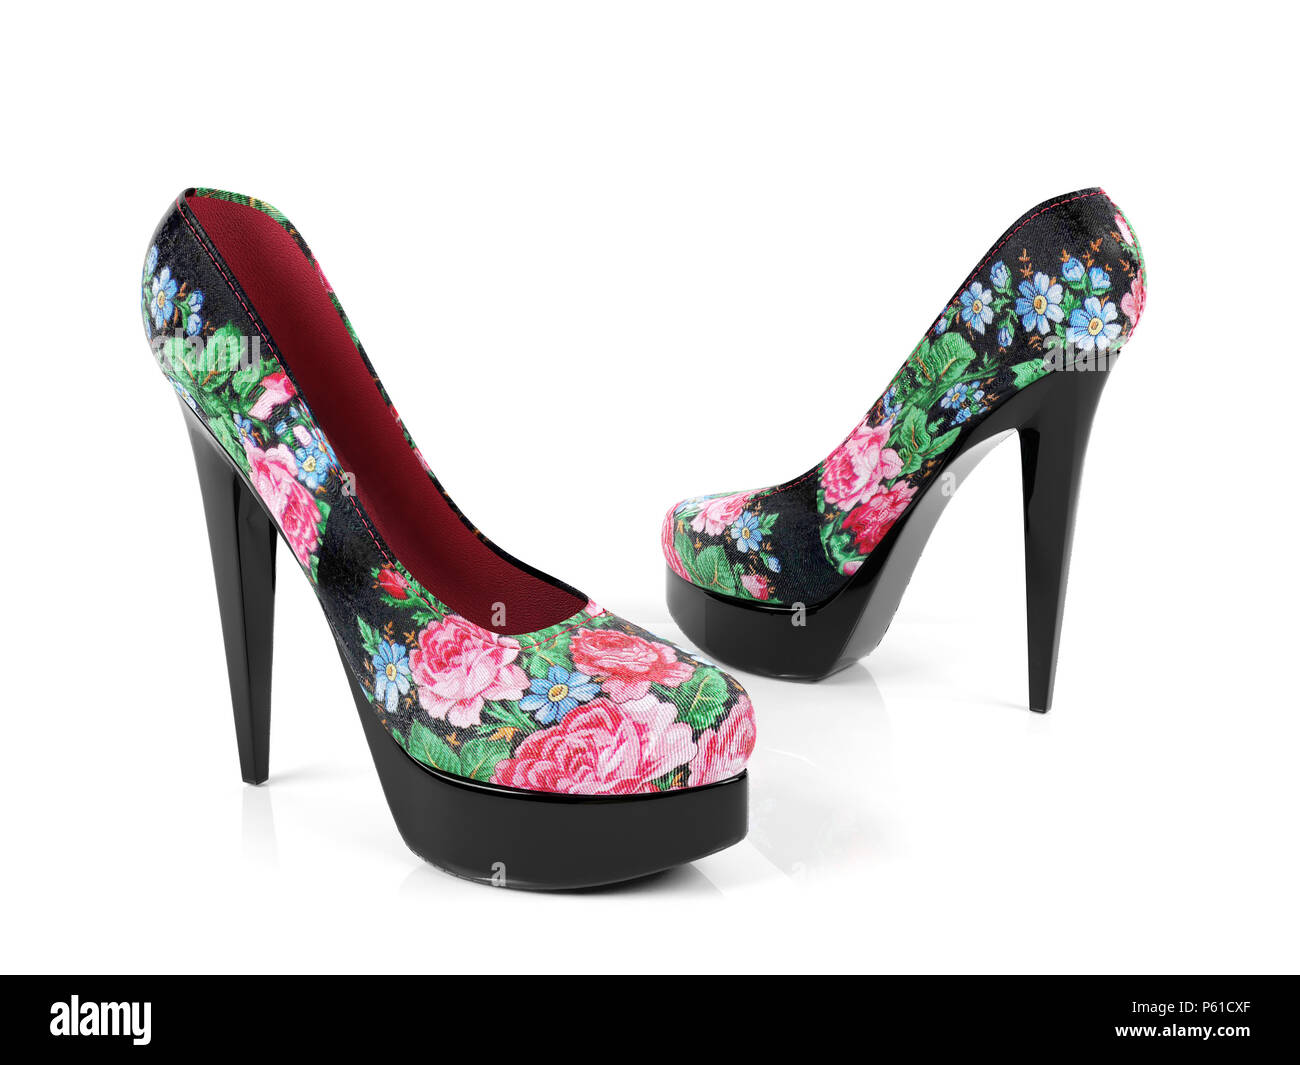 Black And White High Heeled Shoe High Resolution Stock Photography and ...